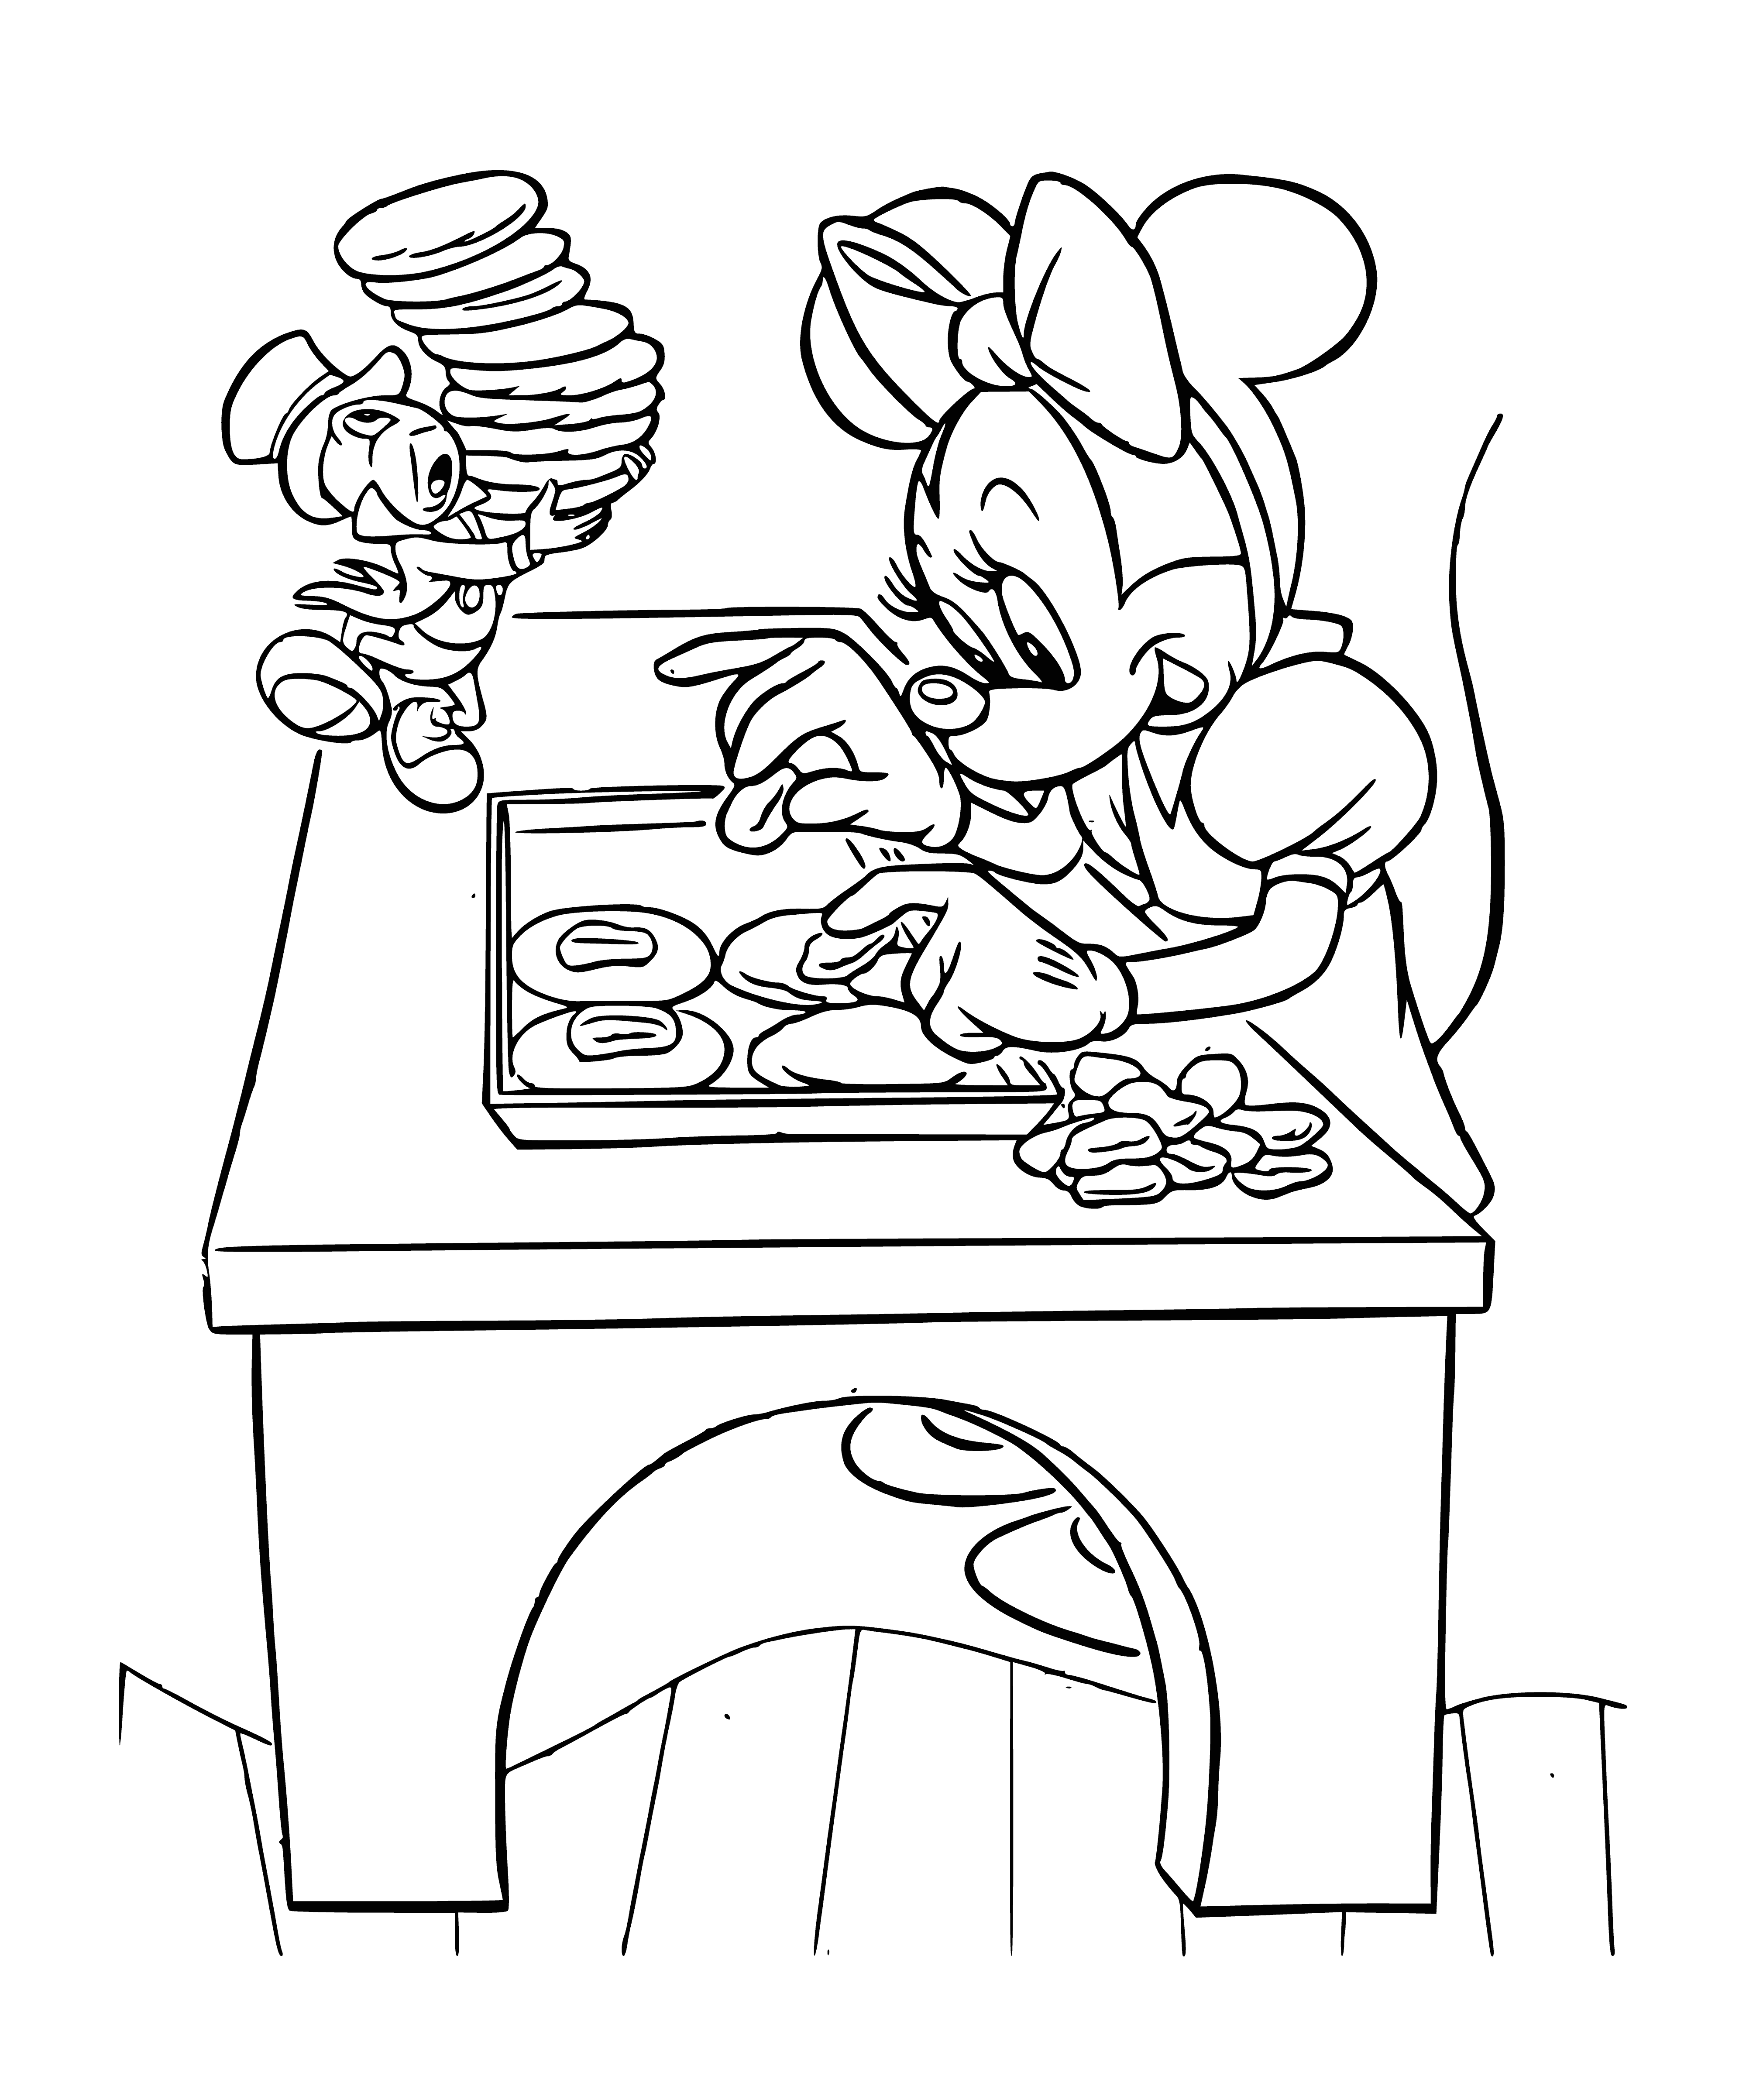 coloring page: There's a box of Mickey Mouse & Co. Biscuits with a coloring page of Mickey Mouse. 7 biscuits inside. Red with white lettering.